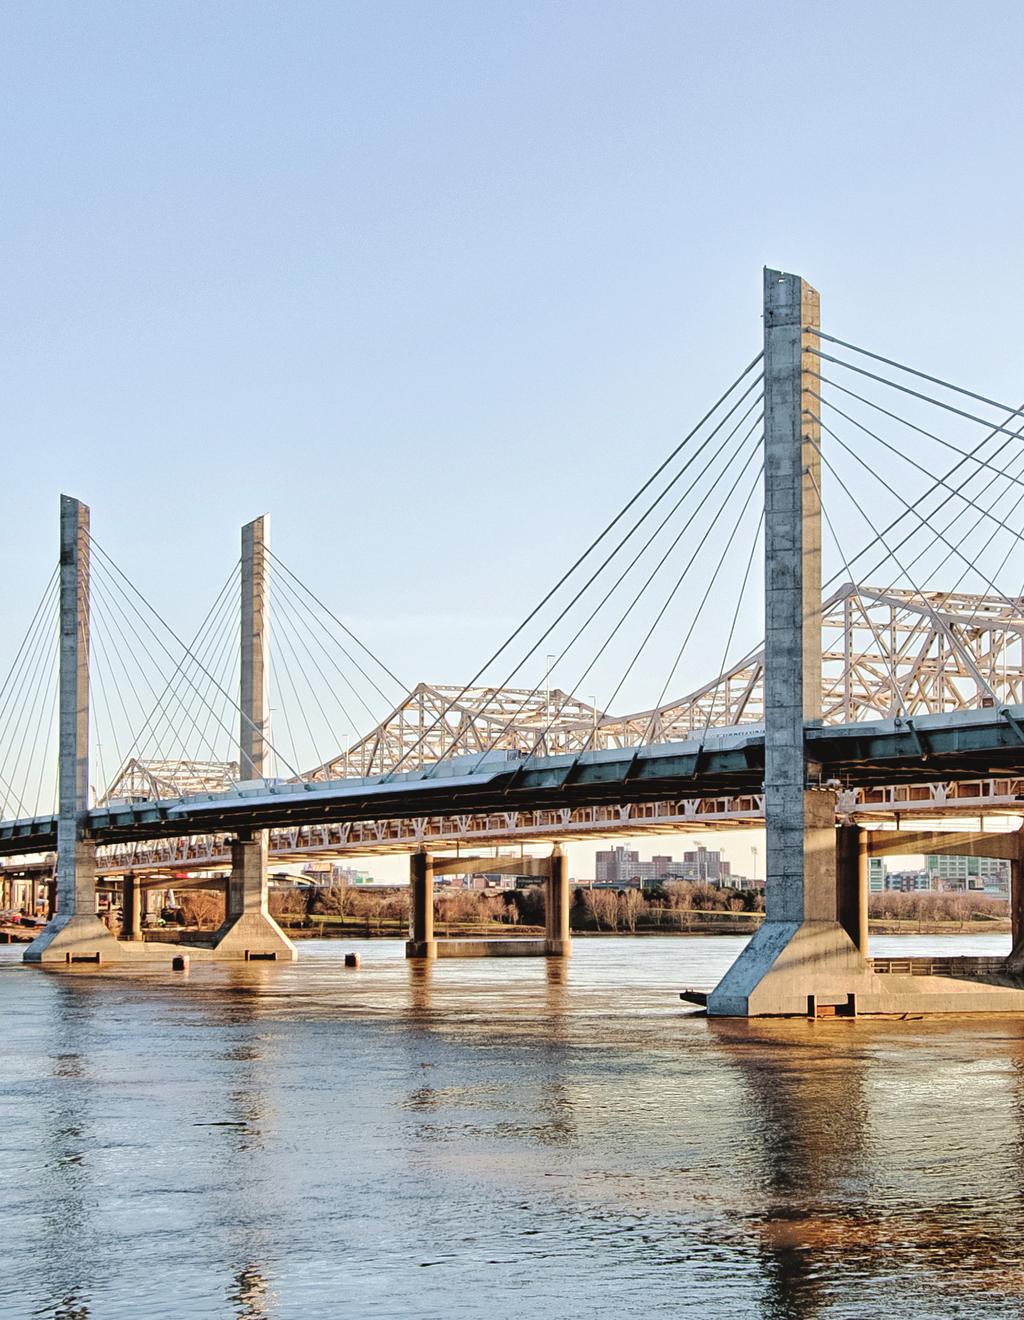 ABRAHAM LINCOLN BRIDGE PROJECT LOCATION: CONNECTING LOUISVILLE, KY WITH JEFFERSON, IN ACROSS THE OHIO RIVER.